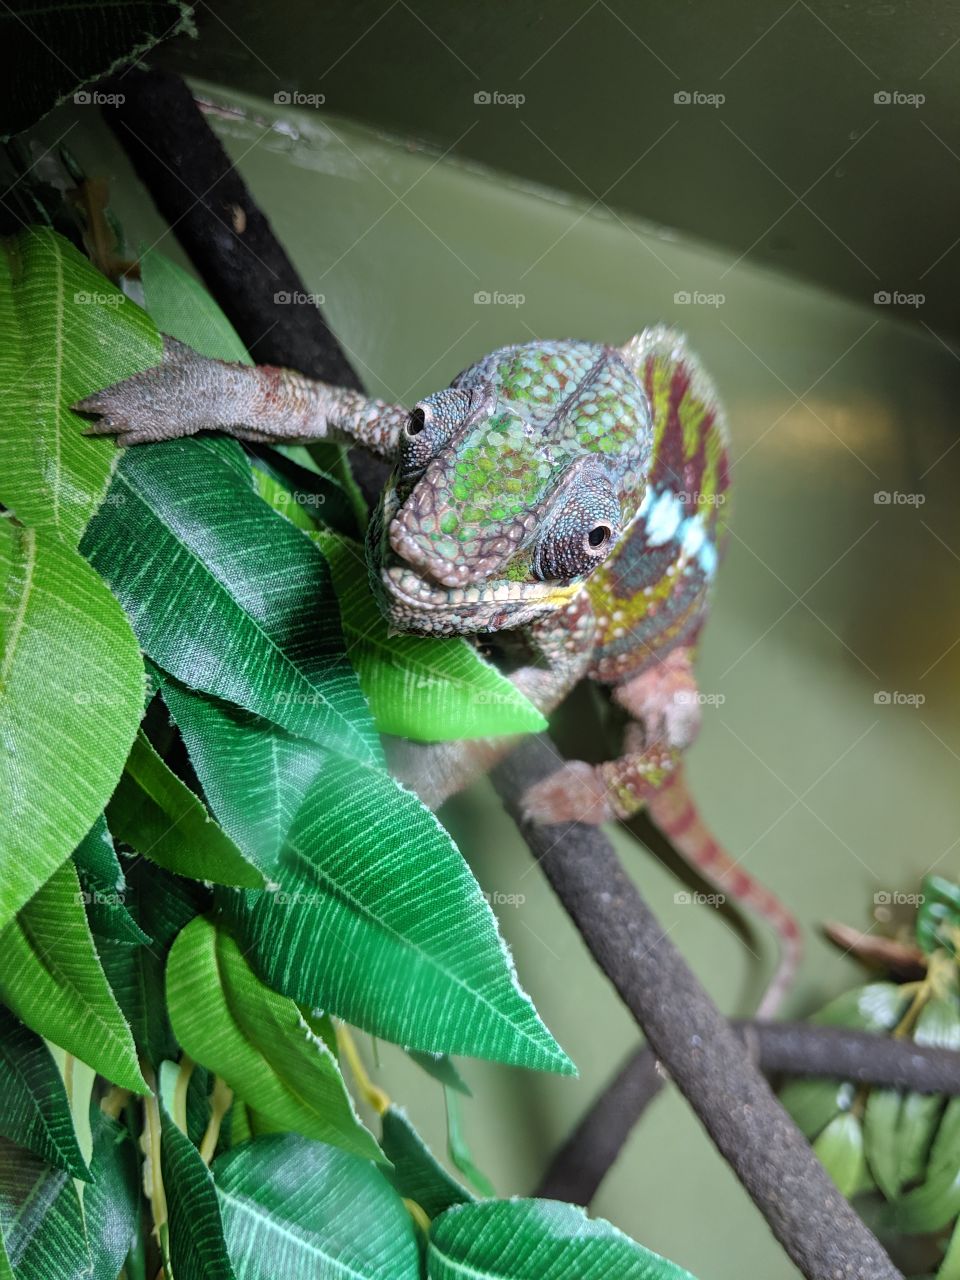 cute little chameleon coming to say hello!